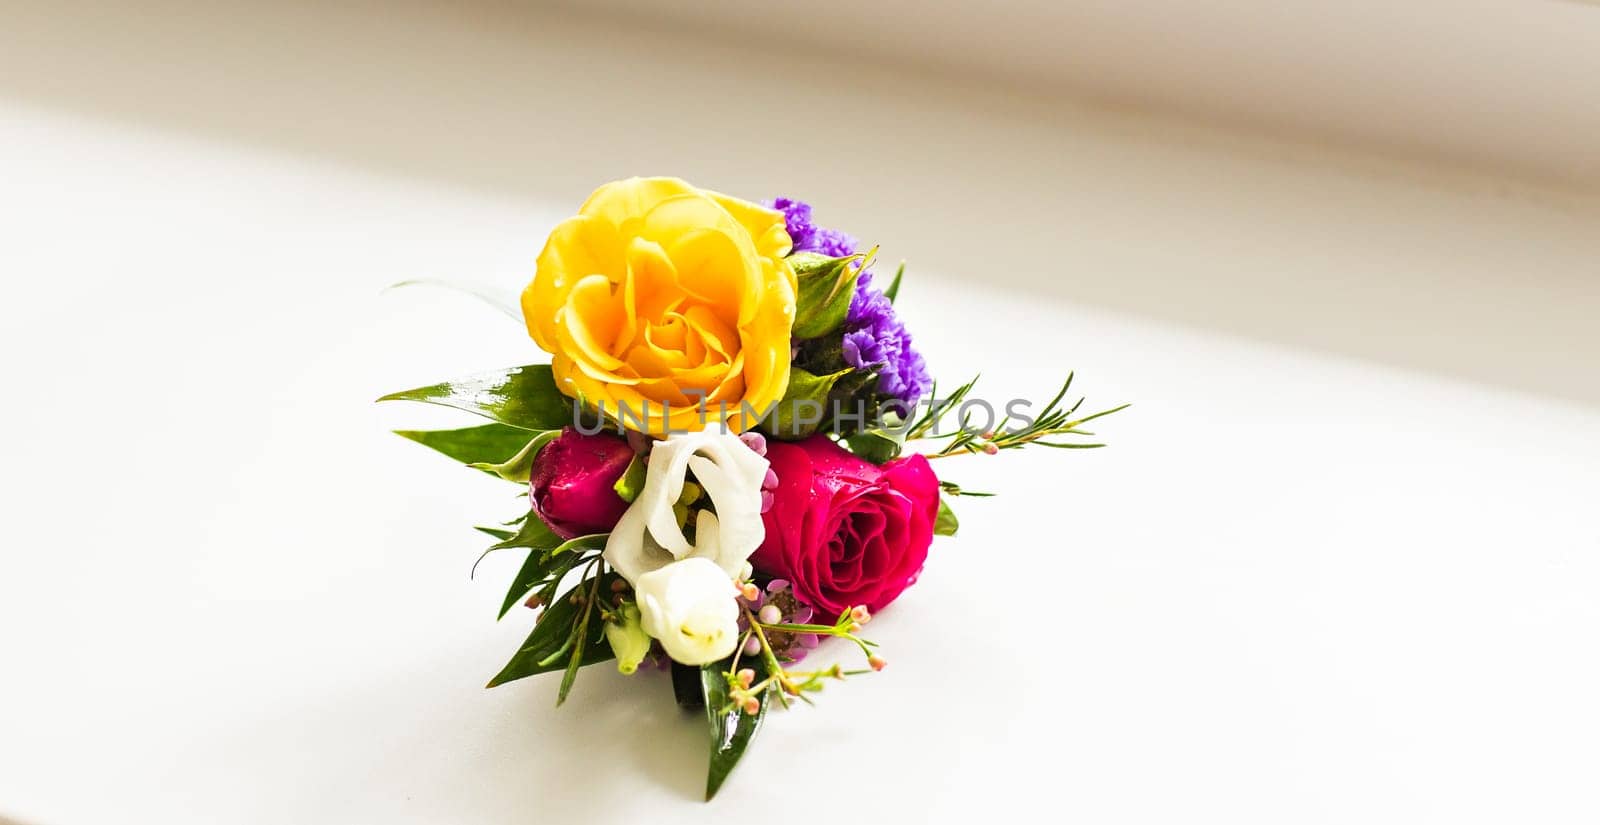 Gentle groom's boutonniere. Wedding accessories for a groom